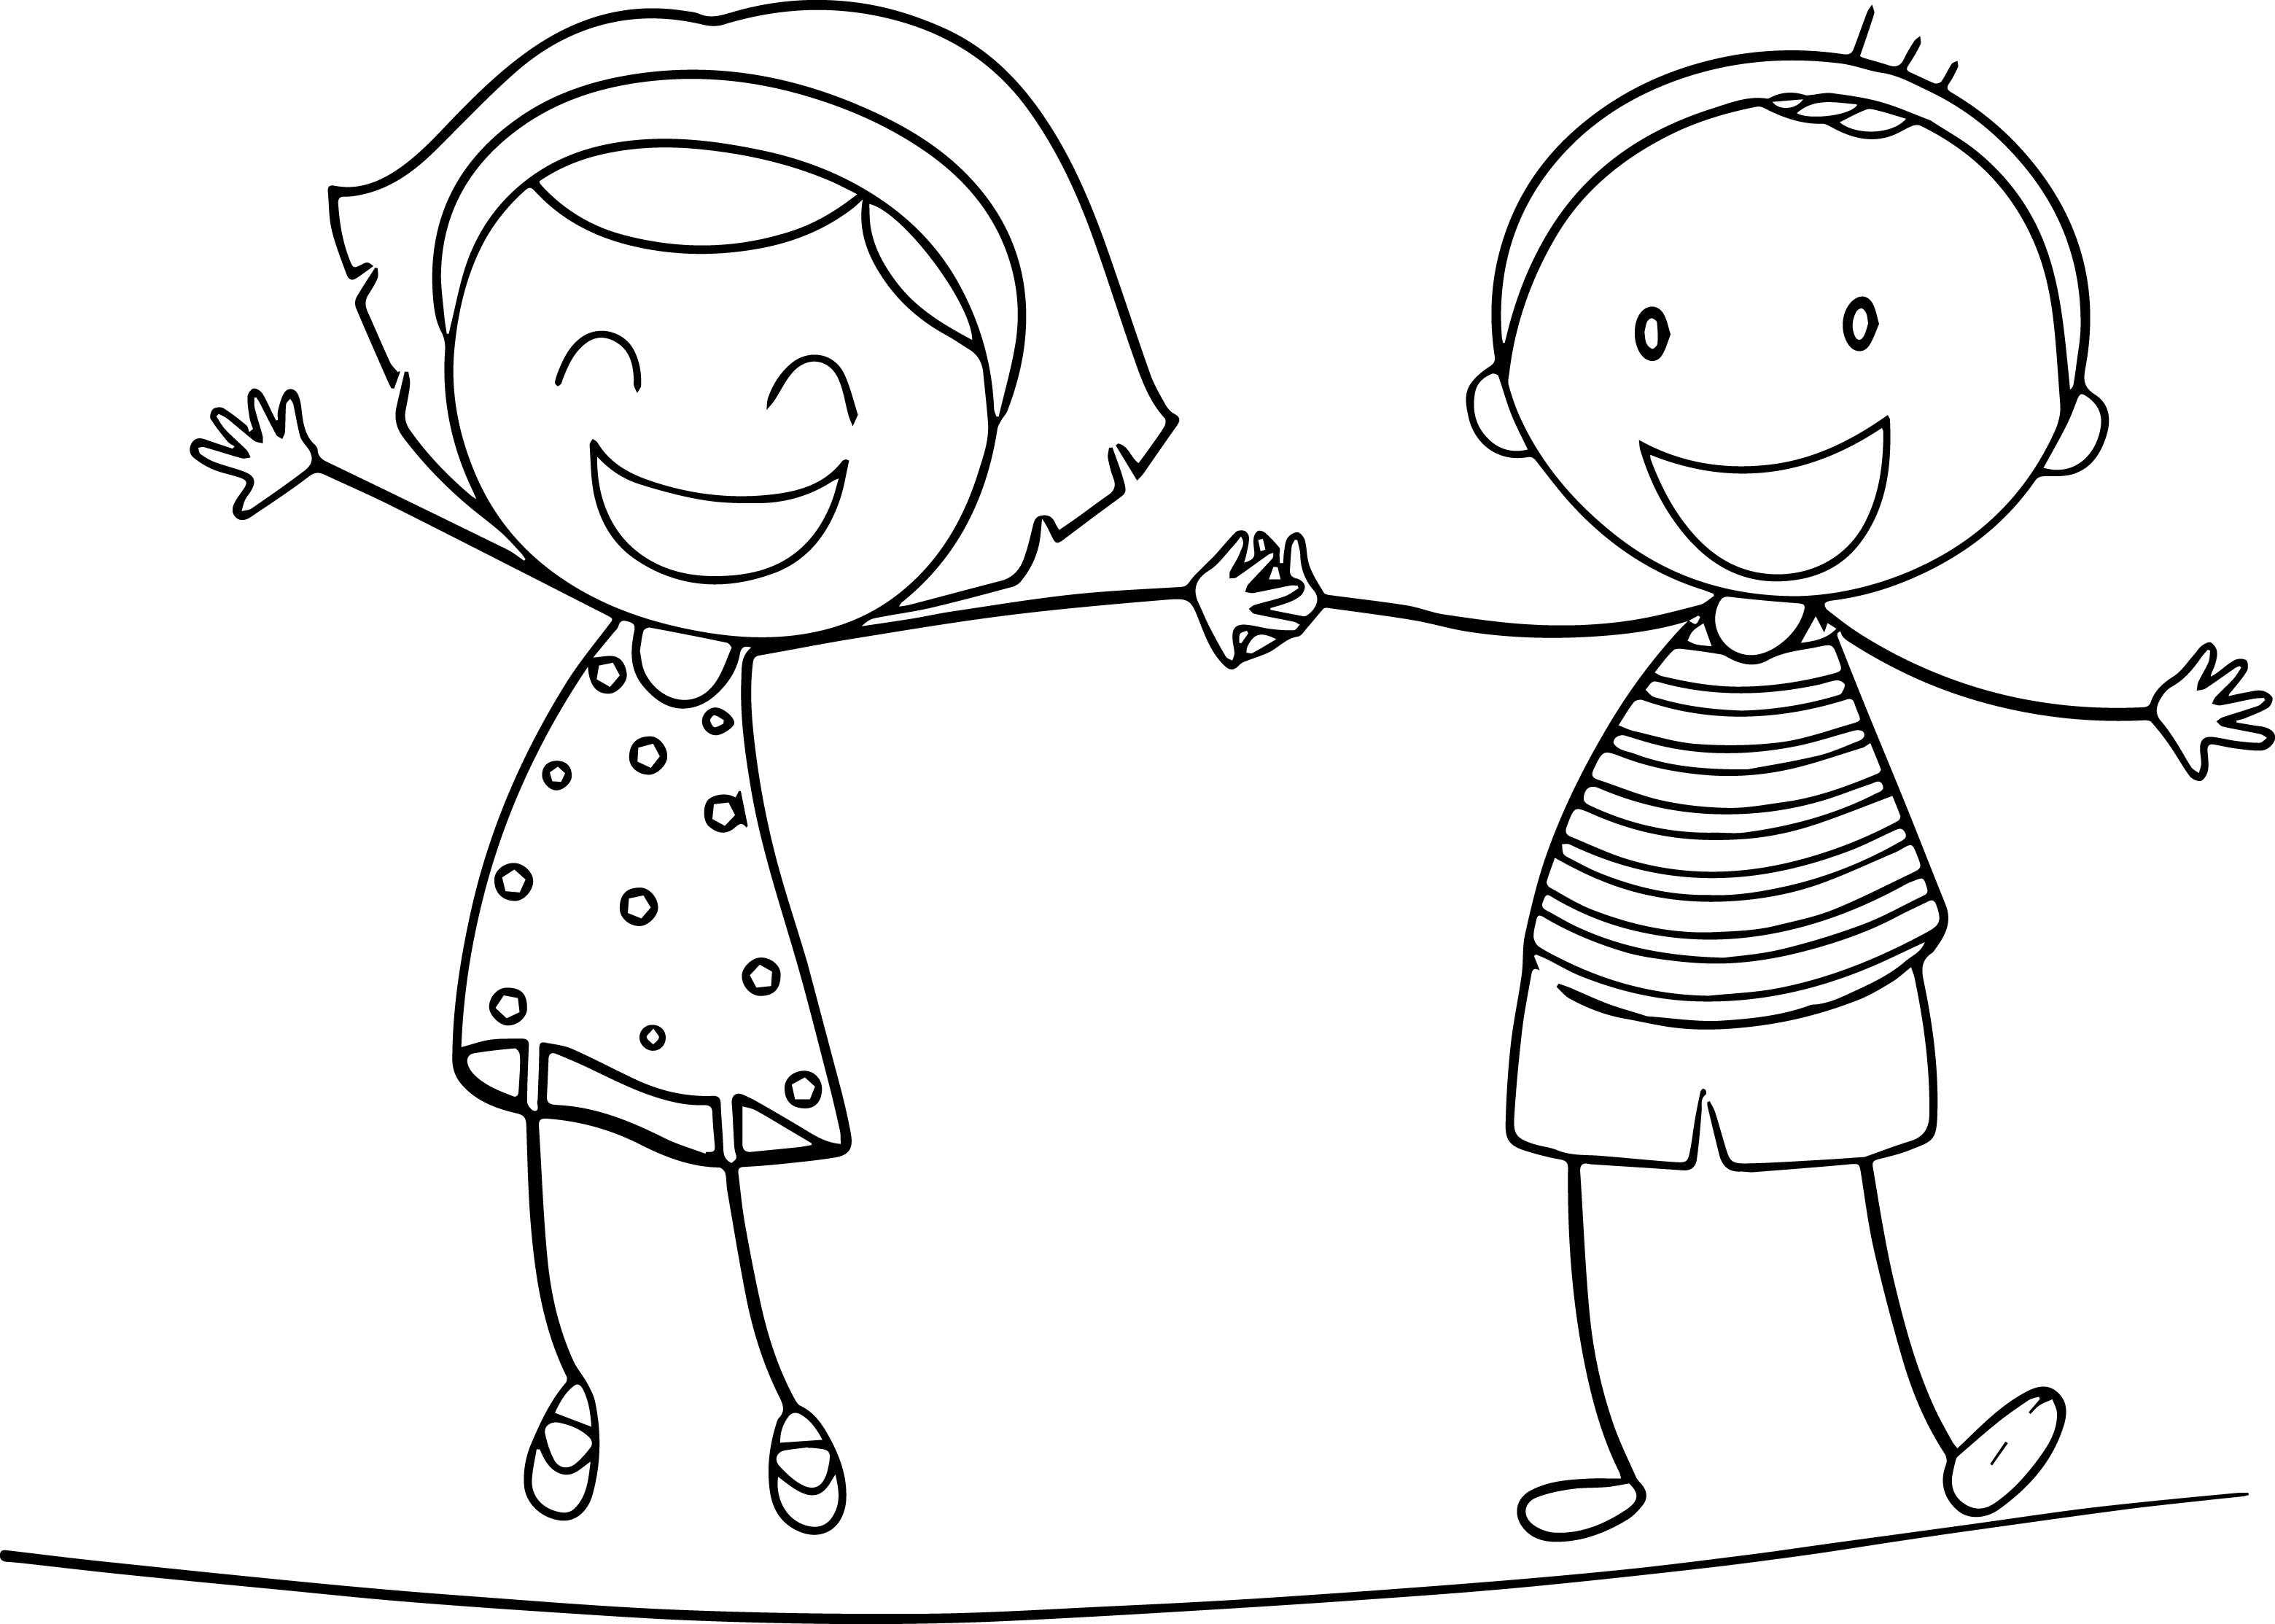 Coloring Sheets For Boys And Girl
 Fun Coloring Pages For Boys And Girls The Art Jinni